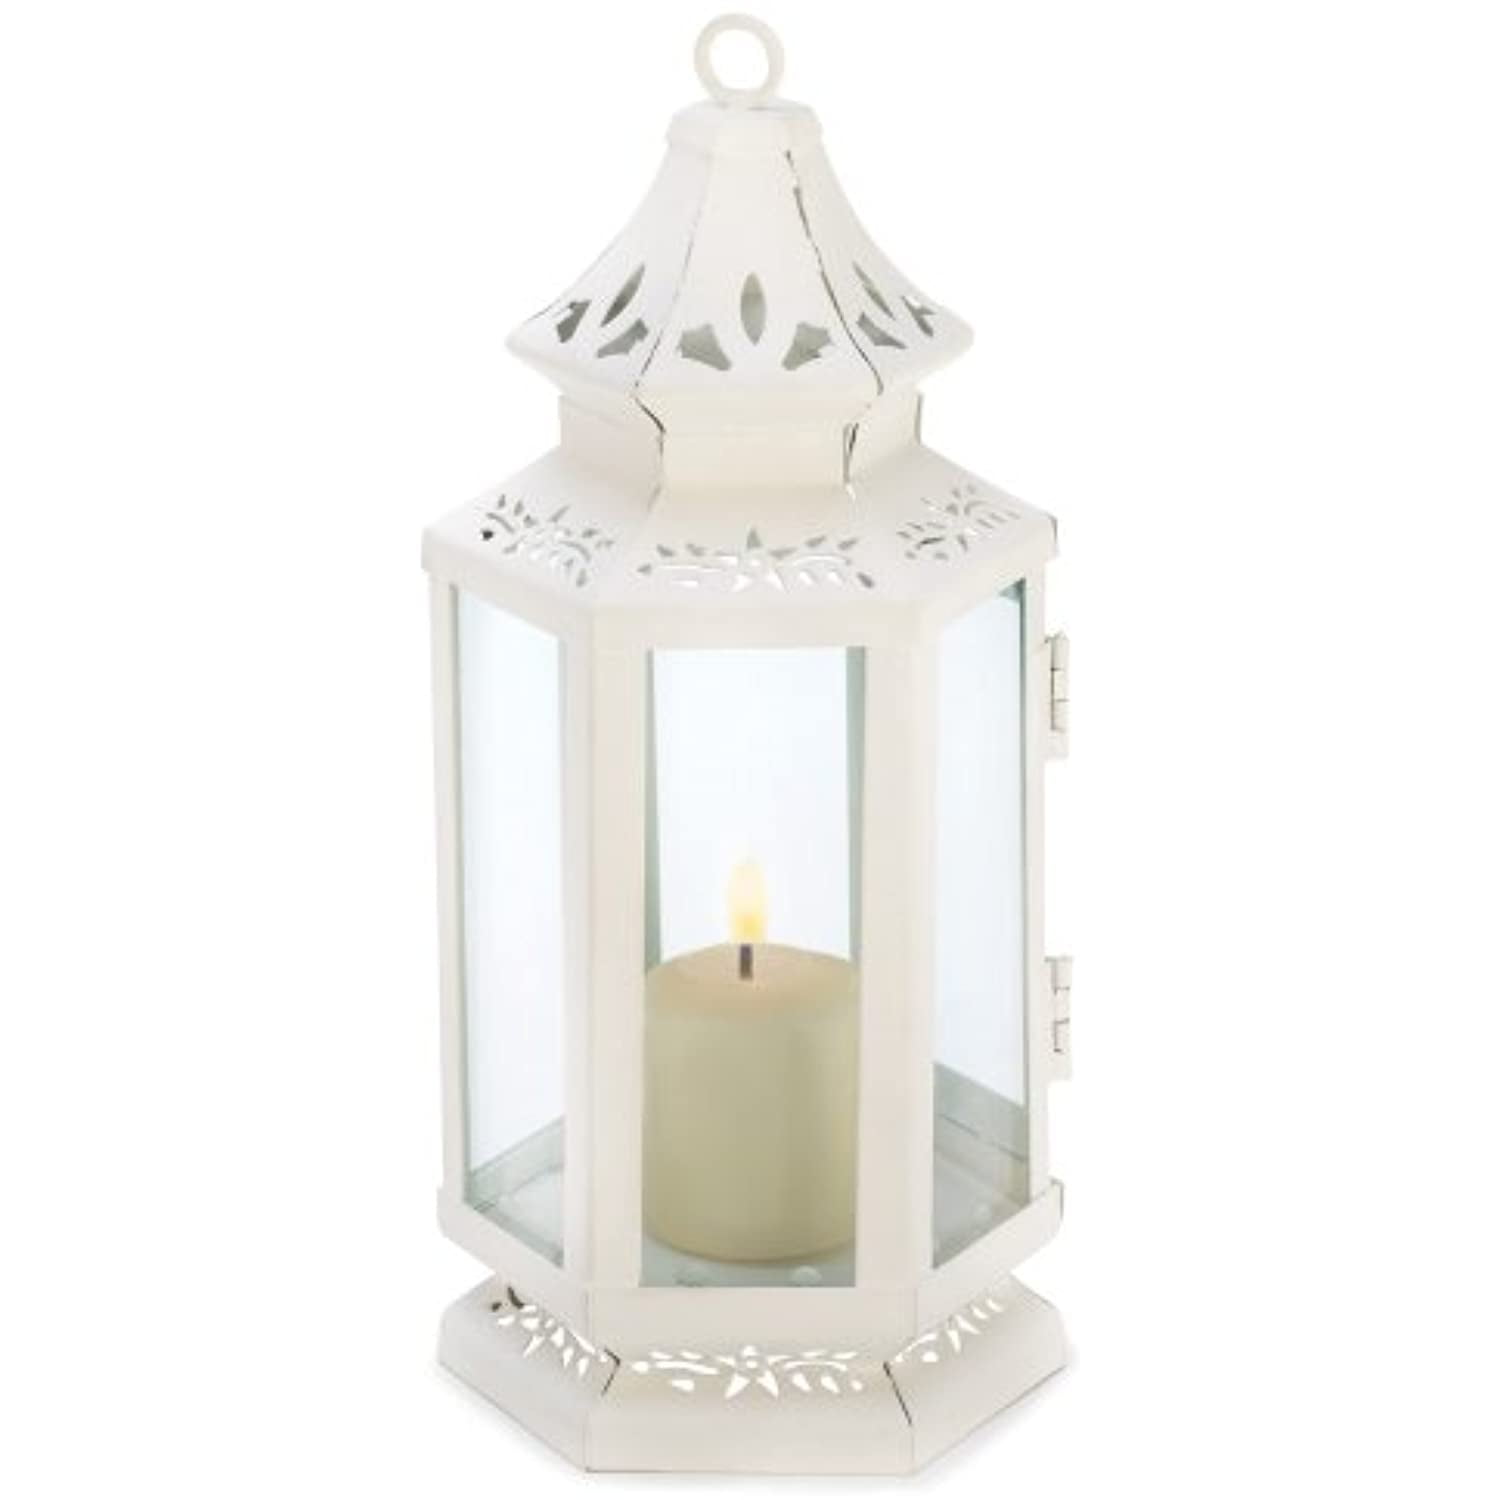 3 White 16" tall shabby distressed whitewashed moroccan Candle holder Lantern 